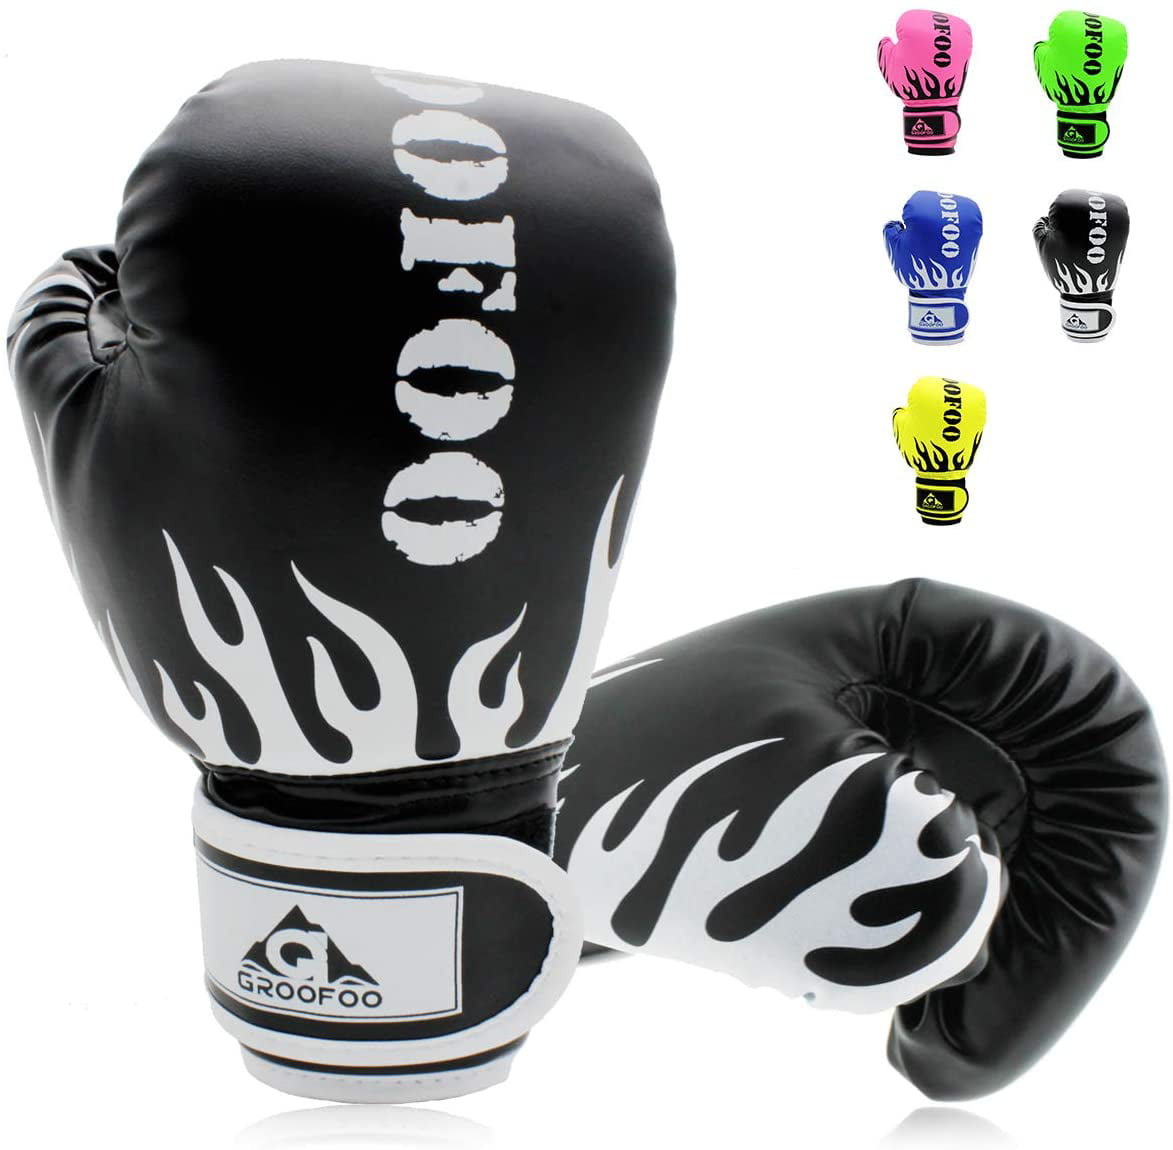 Kids Xmas Gifts Boxing Sparring Training Gloves MMA Kick Boxing Punching Gloves 